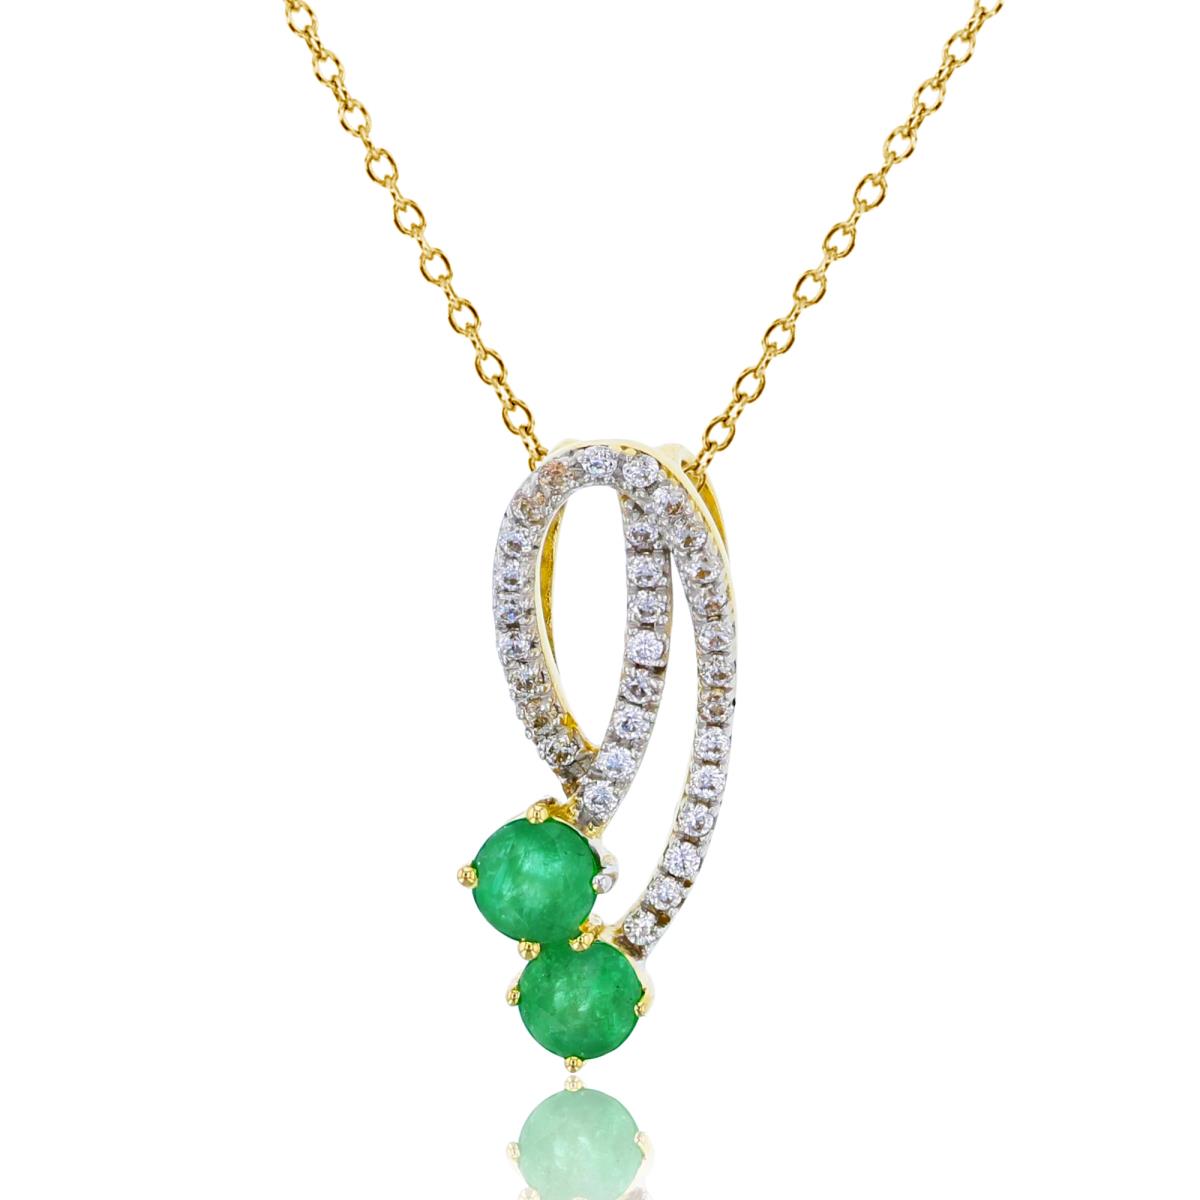 10K Yellow Gold 0.10cttw Rnd Diamonds & 3.5mm Rnd Emerald Open Rows 18"Necklace